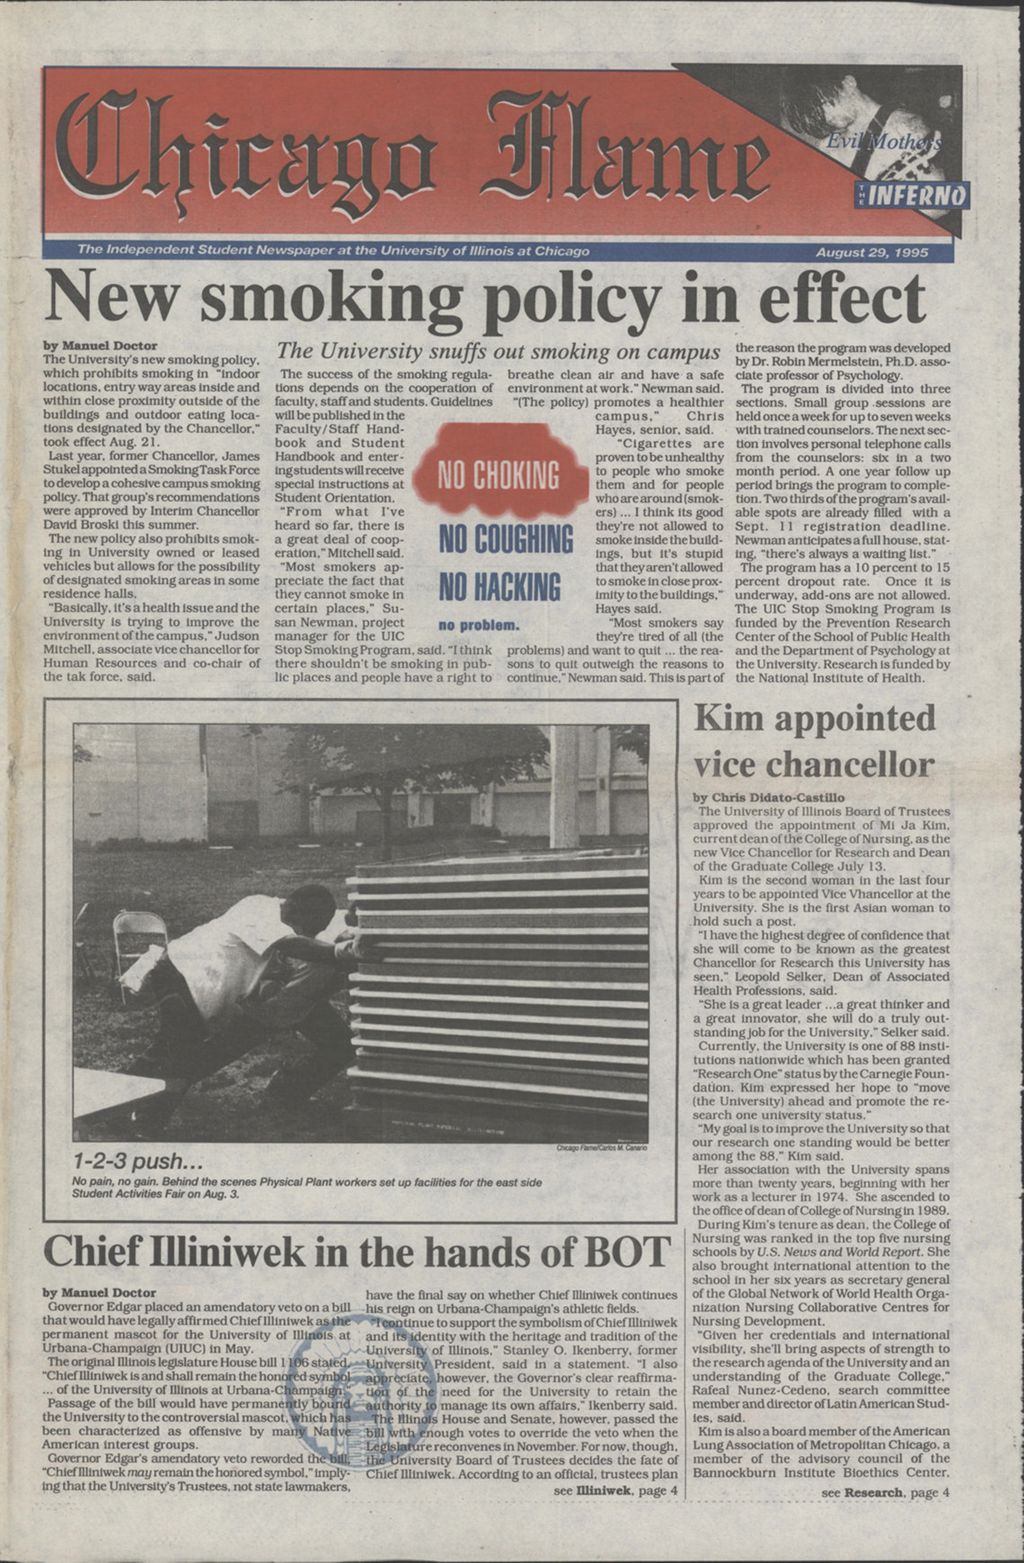 Miniature of Chicago Flame (August 29, 1995)